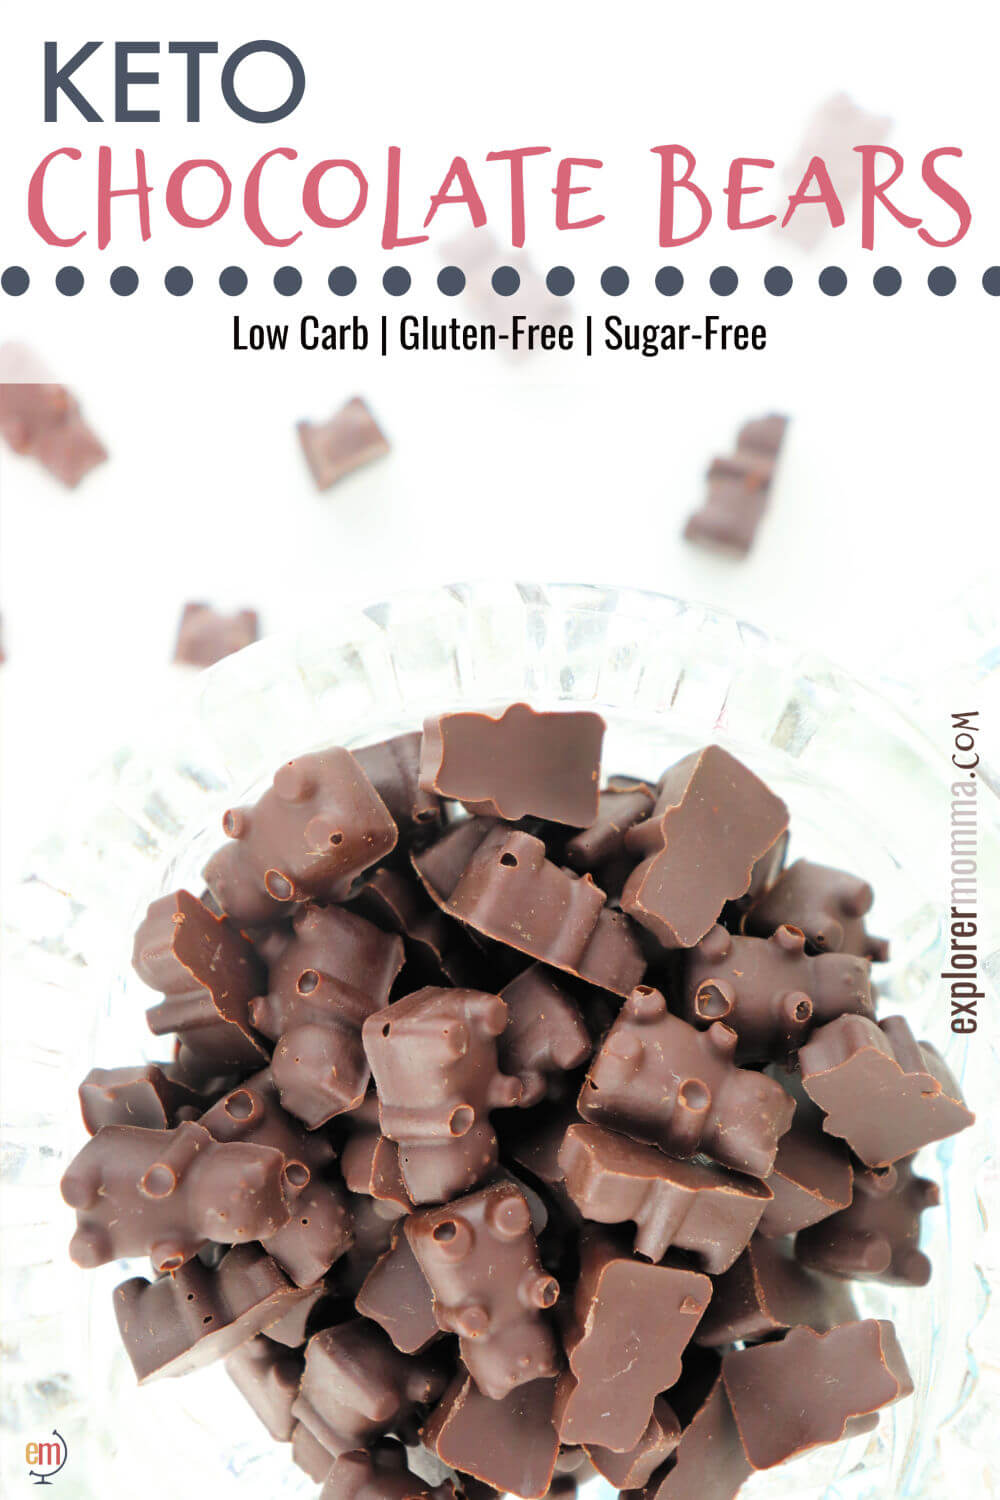 Keto Chocolate Bears are a sugar-free chocolate treat you'll love. It's the perfect chocolate to have for a low carb diet chocolate craving, and just a couple will do the trick. #ketodesserts #ketochocolate #lowcarbrecipes #ketochocolaterecipes